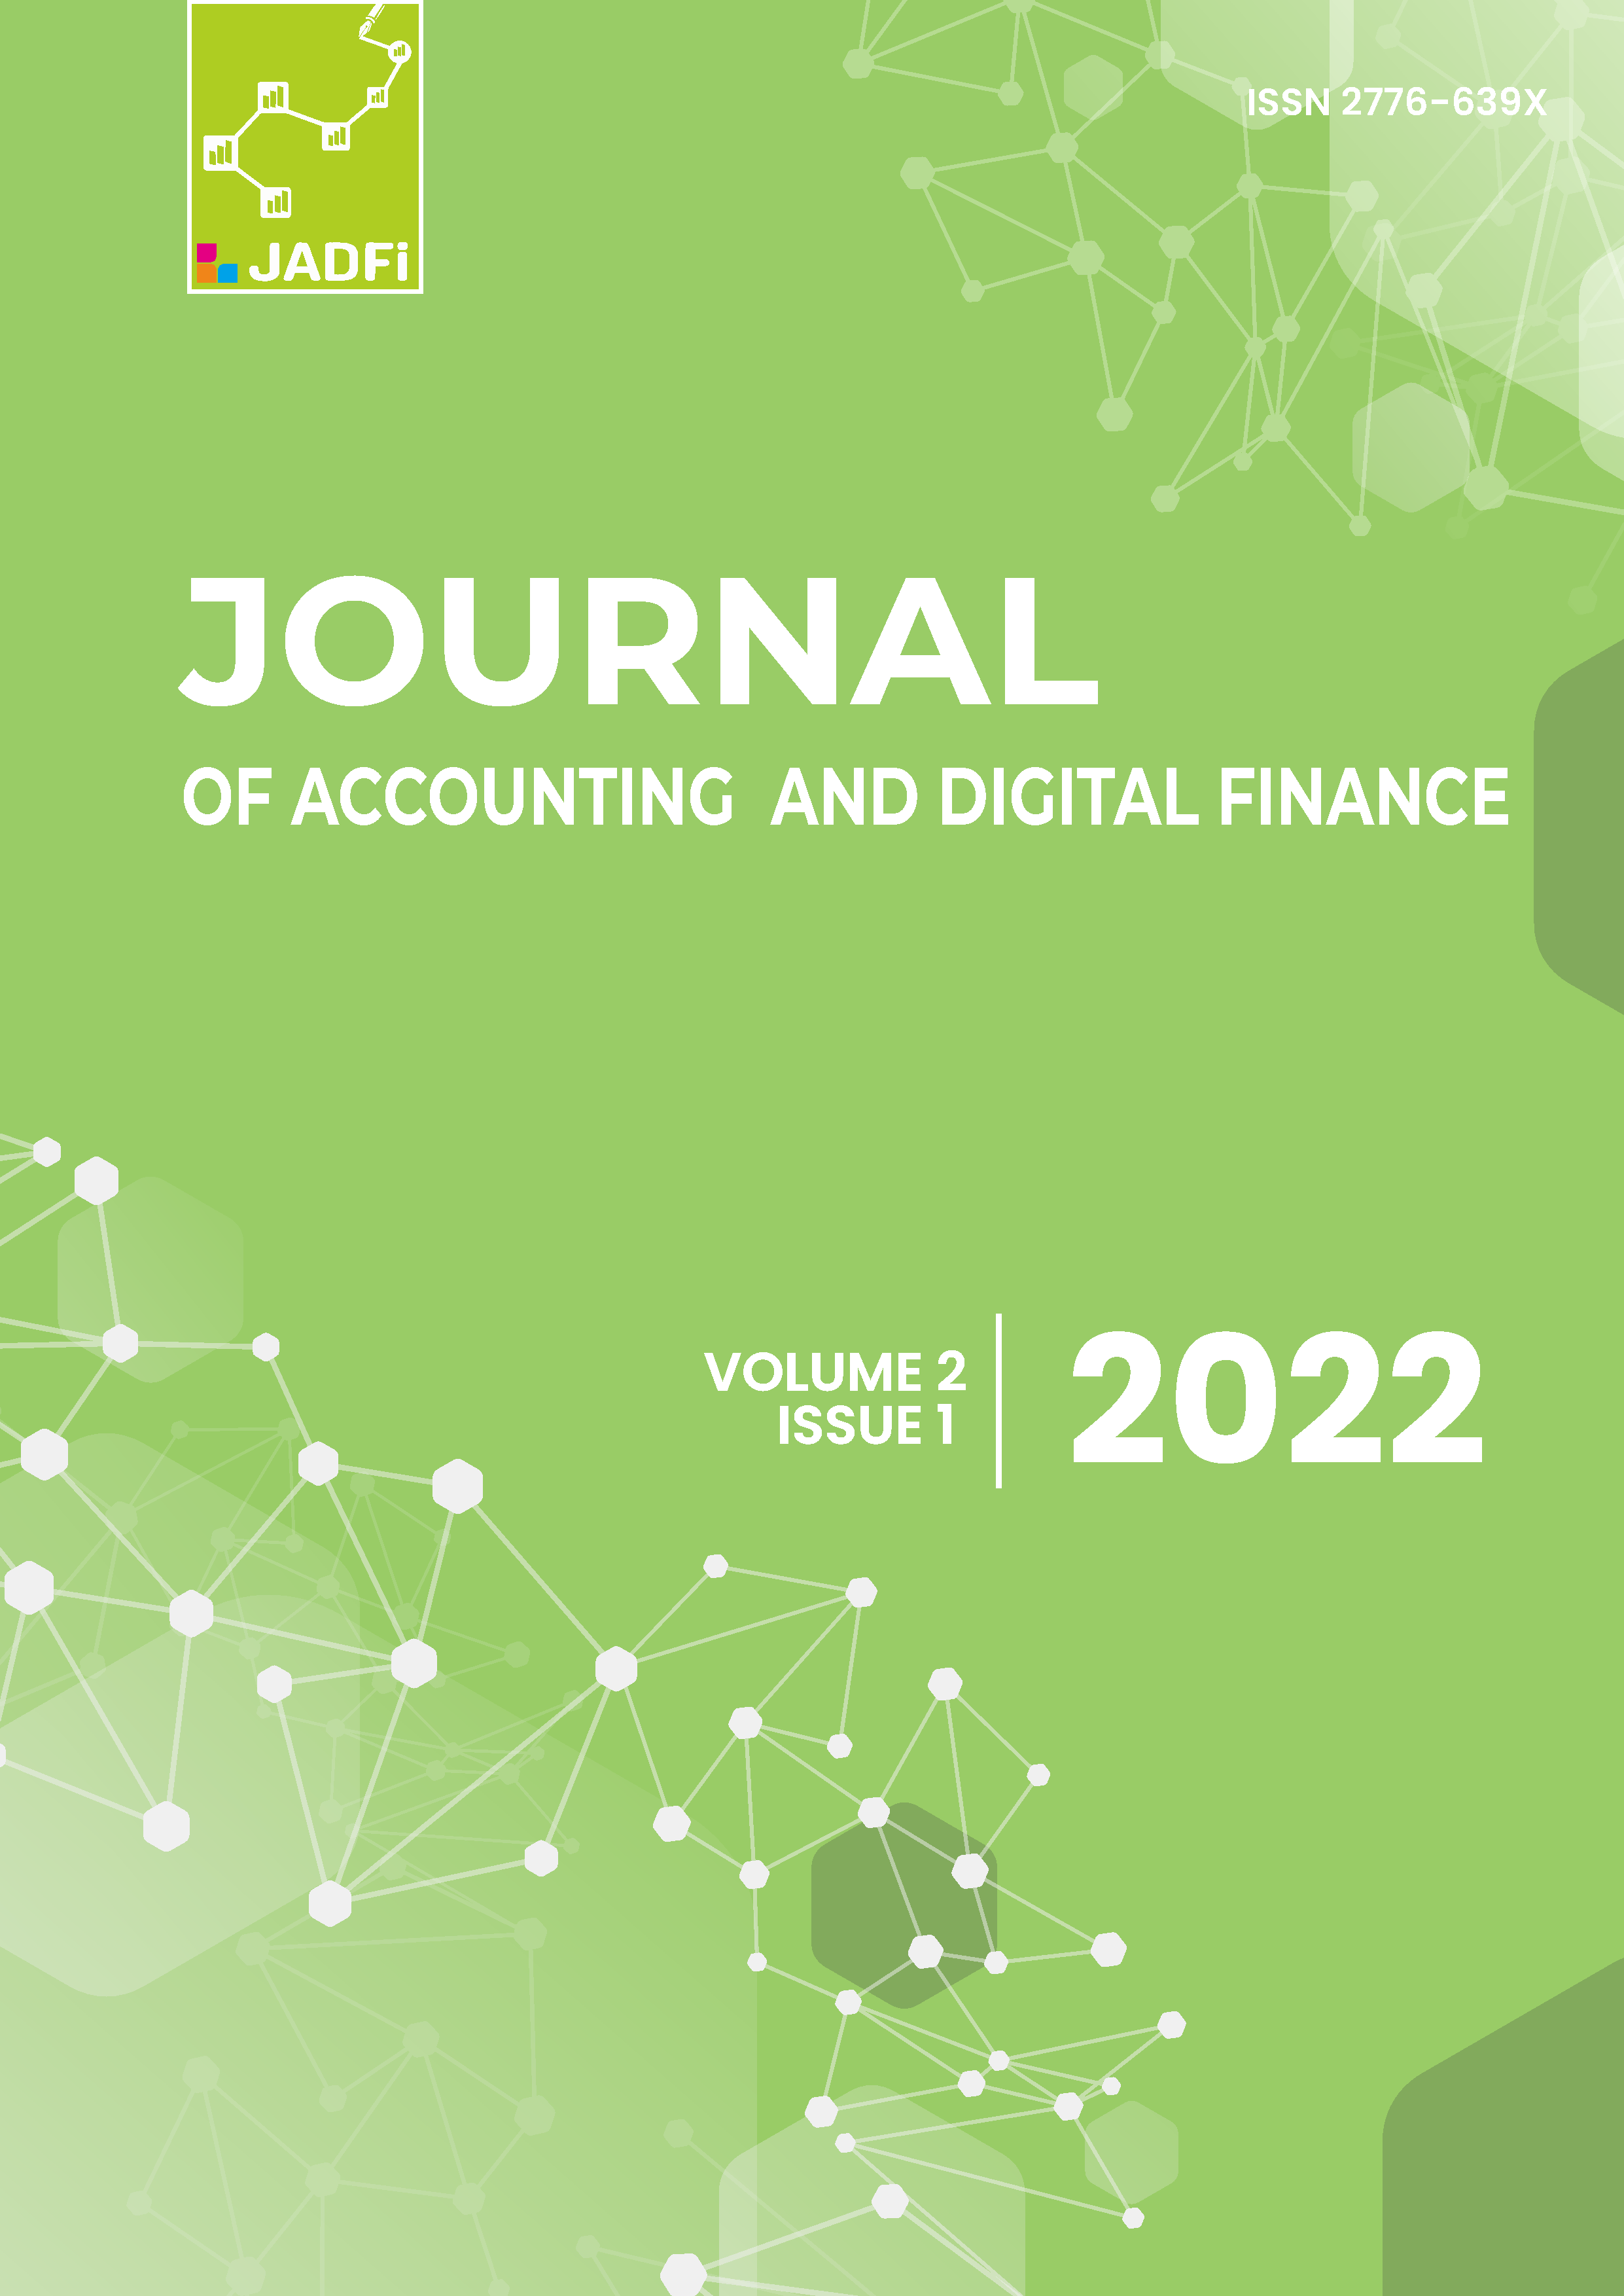 					View Vol. 2 No. 1 (2022): Journal of Accounting and Digital Finance
				